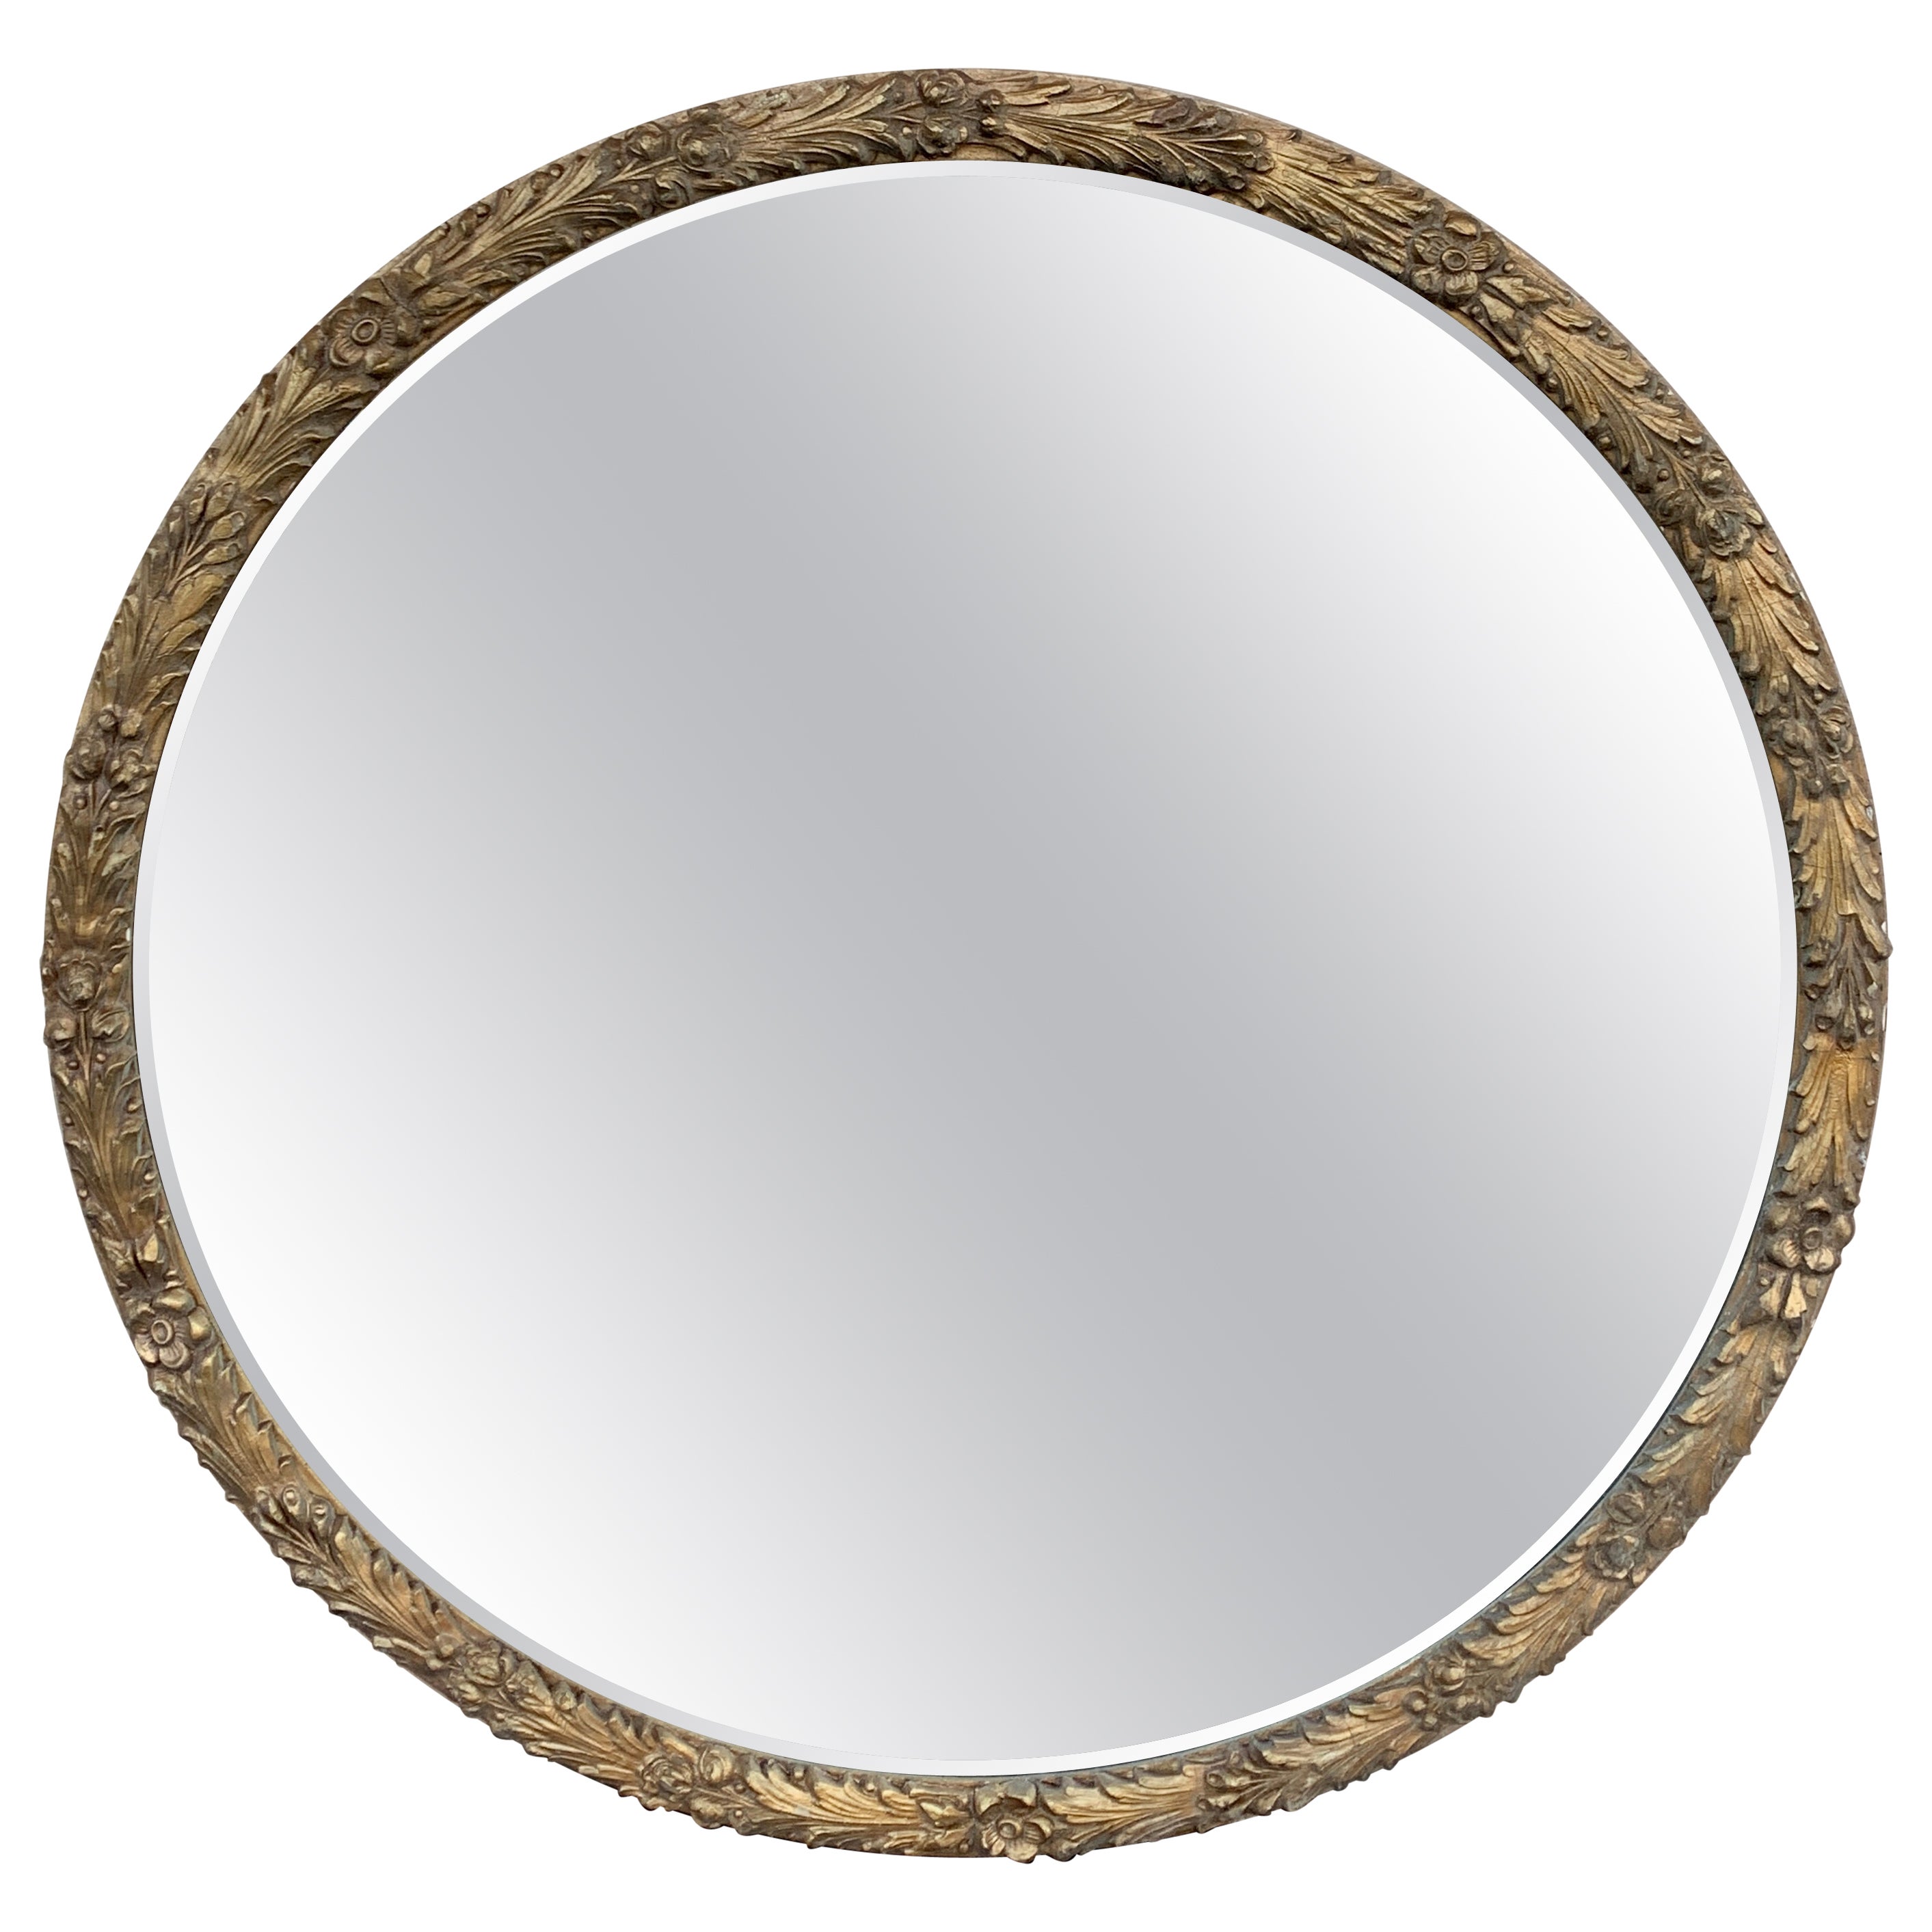 Antique Carved Foliate Round Giltwood Mirror, Circa 1940s For Sale